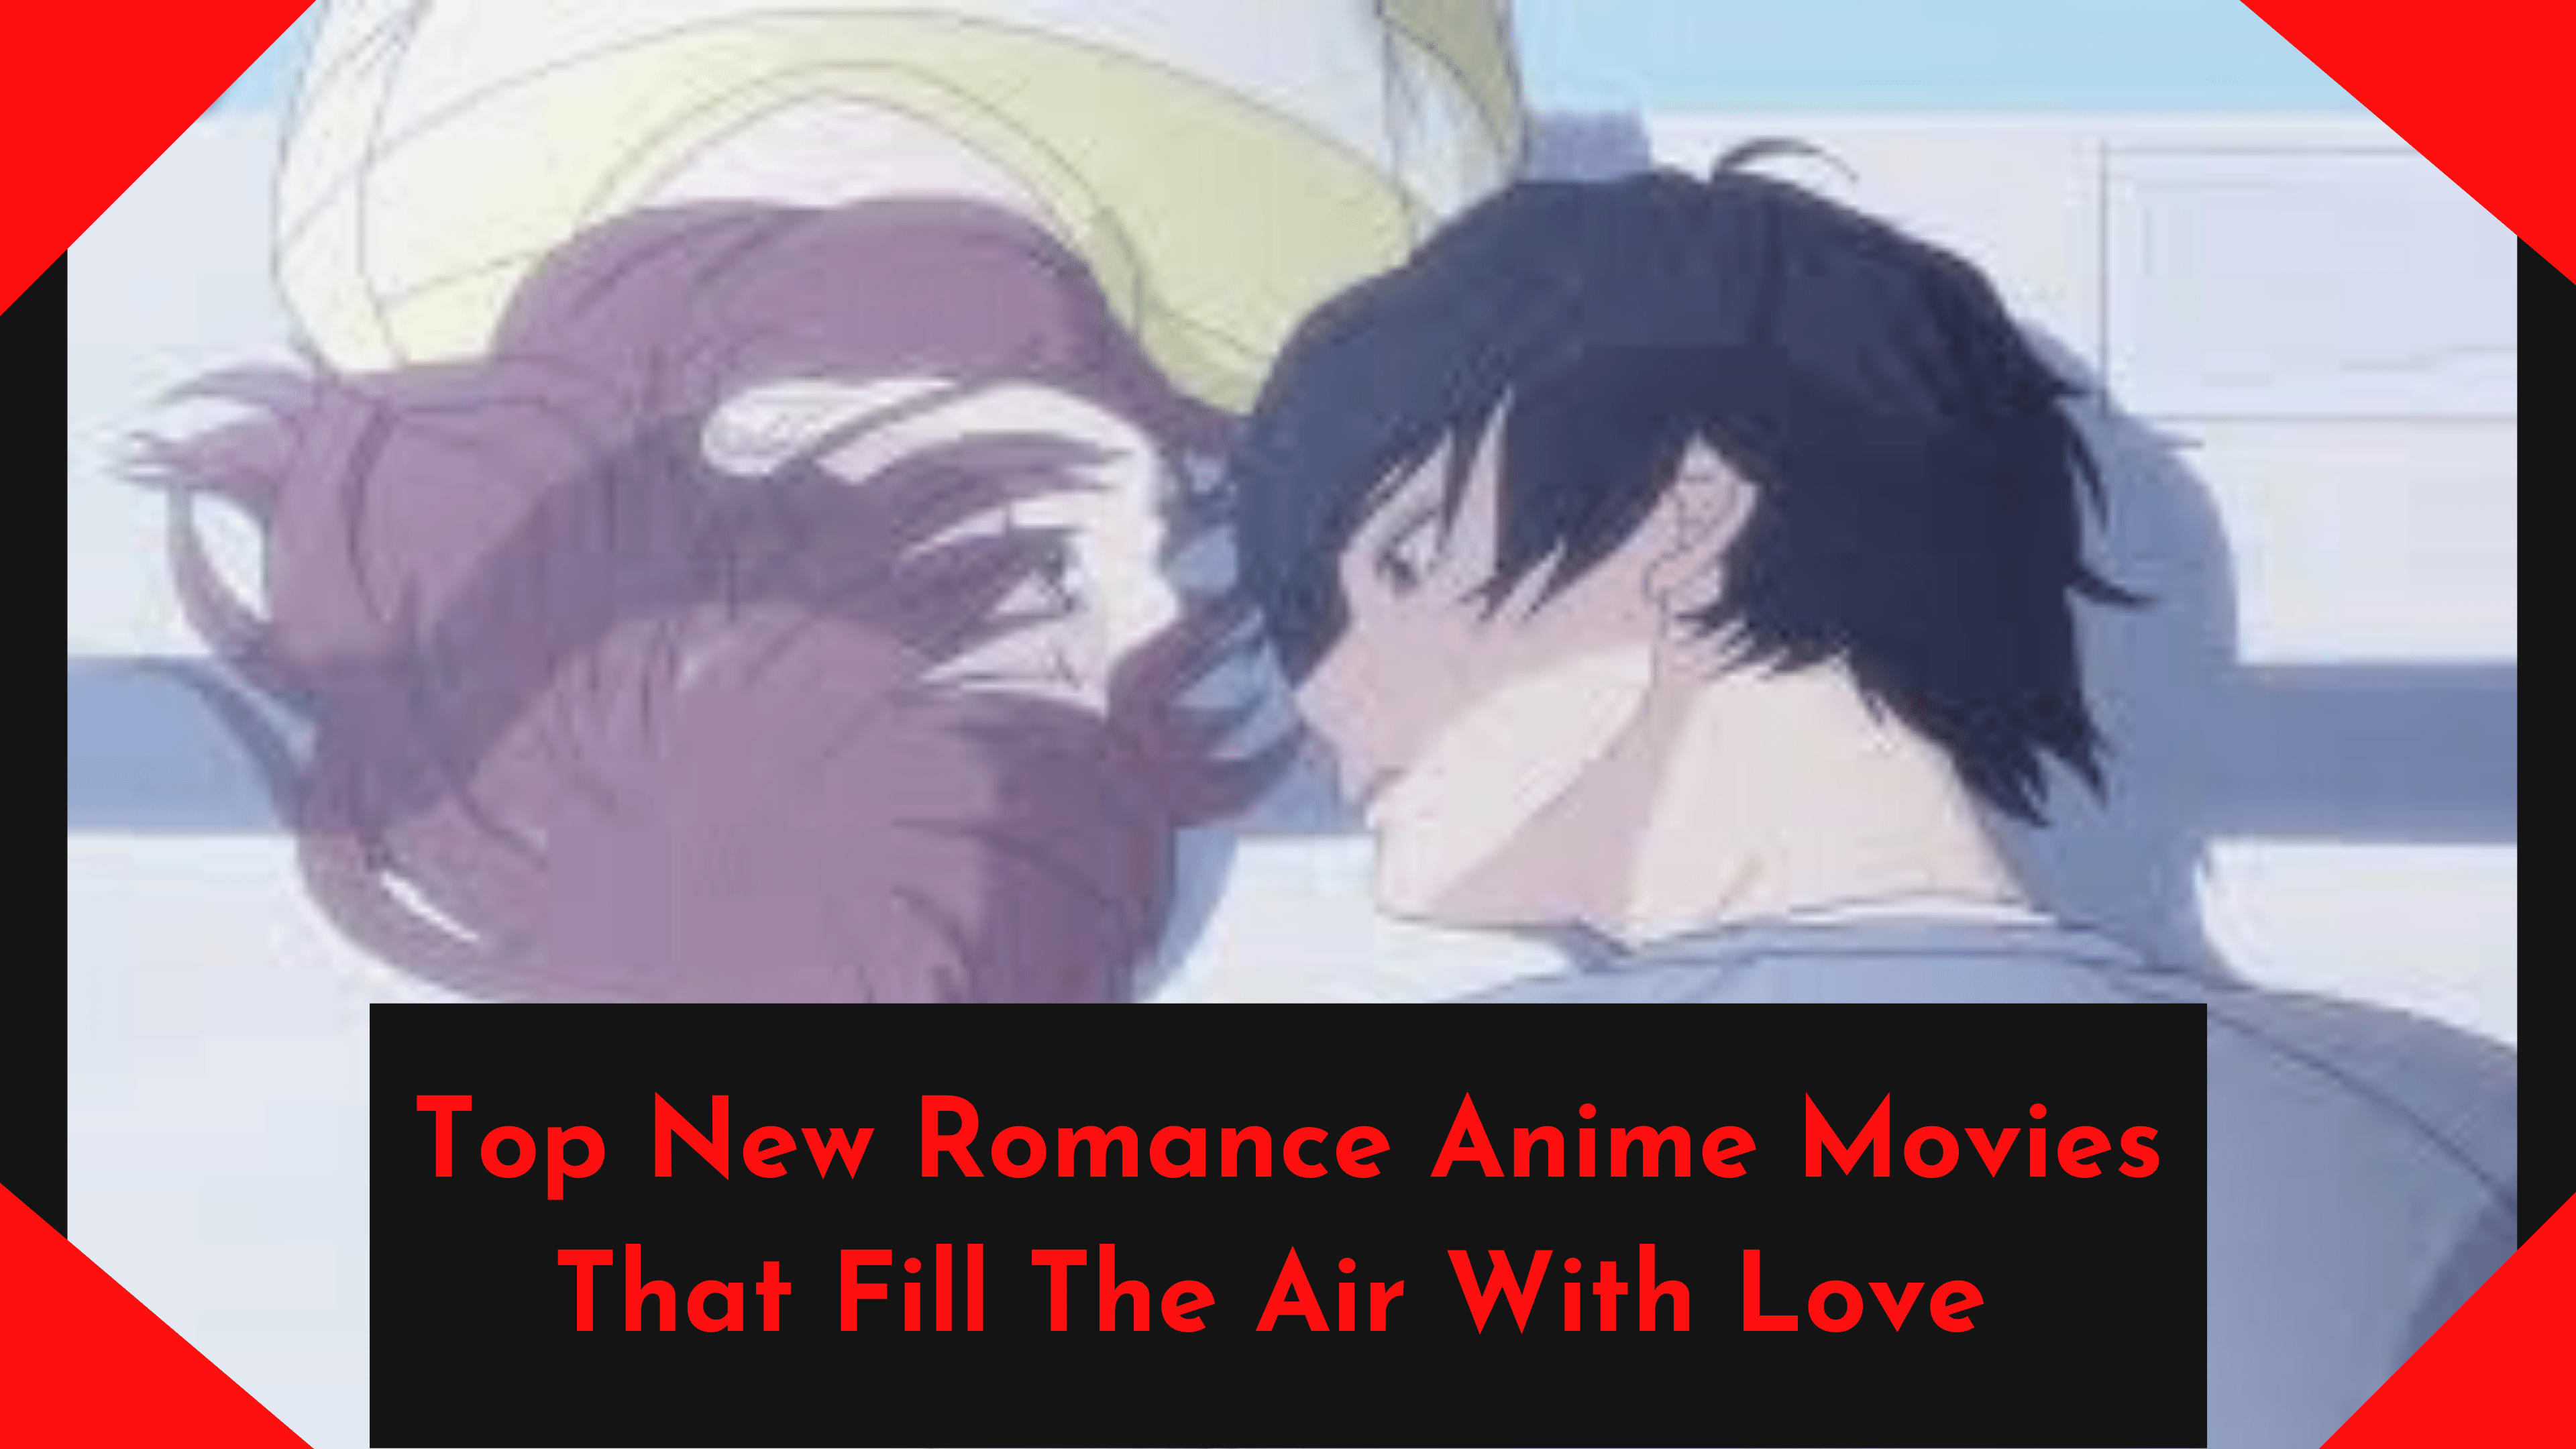 Top New Romance Anime Movies That Fill The Air With Love | Otaku Fanatic